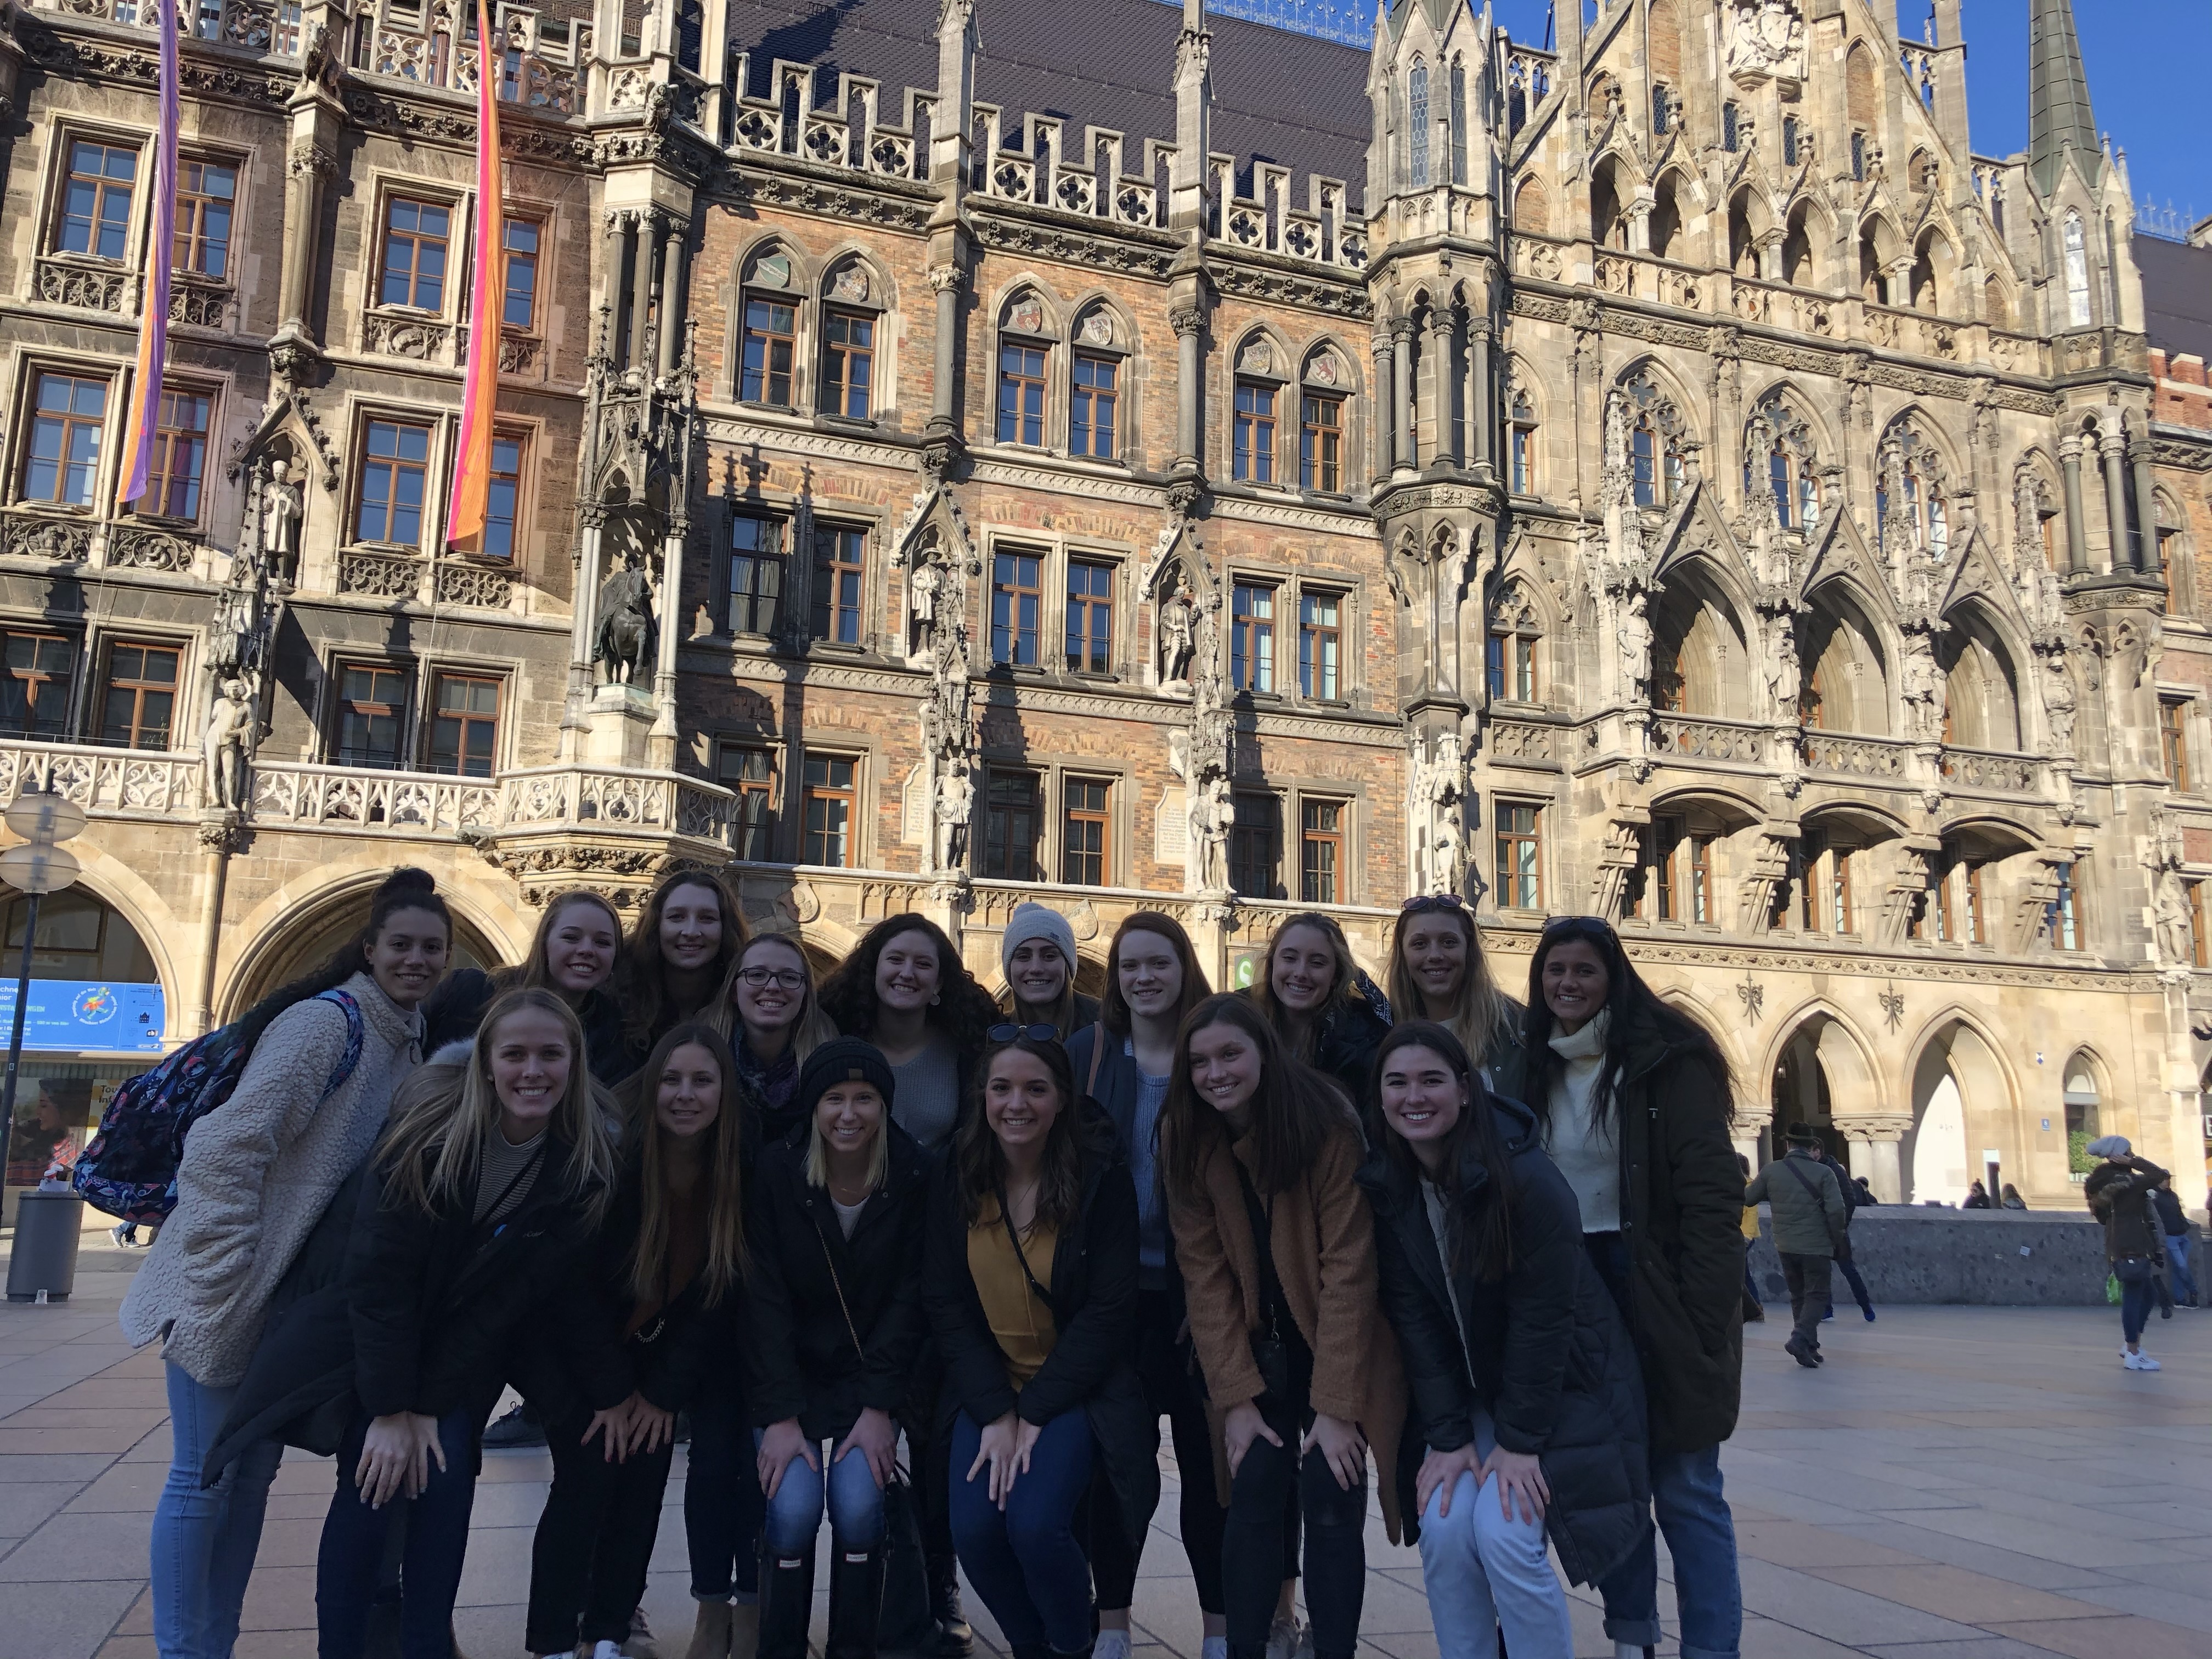 The Illinois Wesleyan University volleyball team was on an exhibition tour of Germany and Austria when the pandemic prompted an early return home.